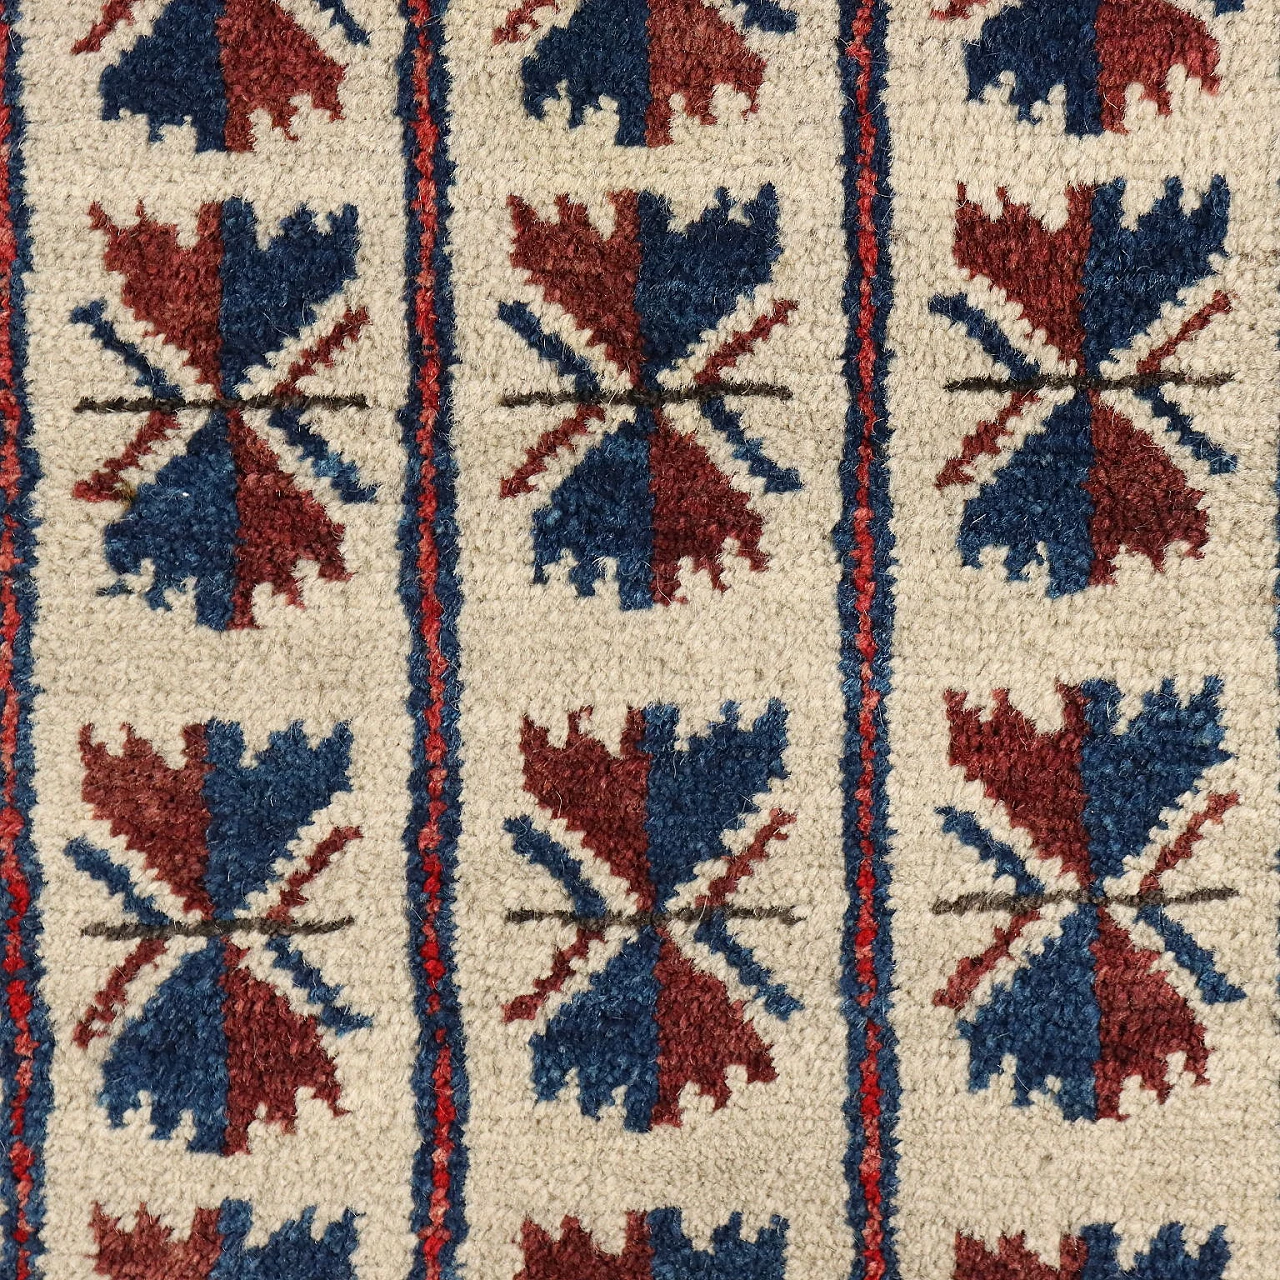 Iranian red, blue and beige wool Beluchi rug 3